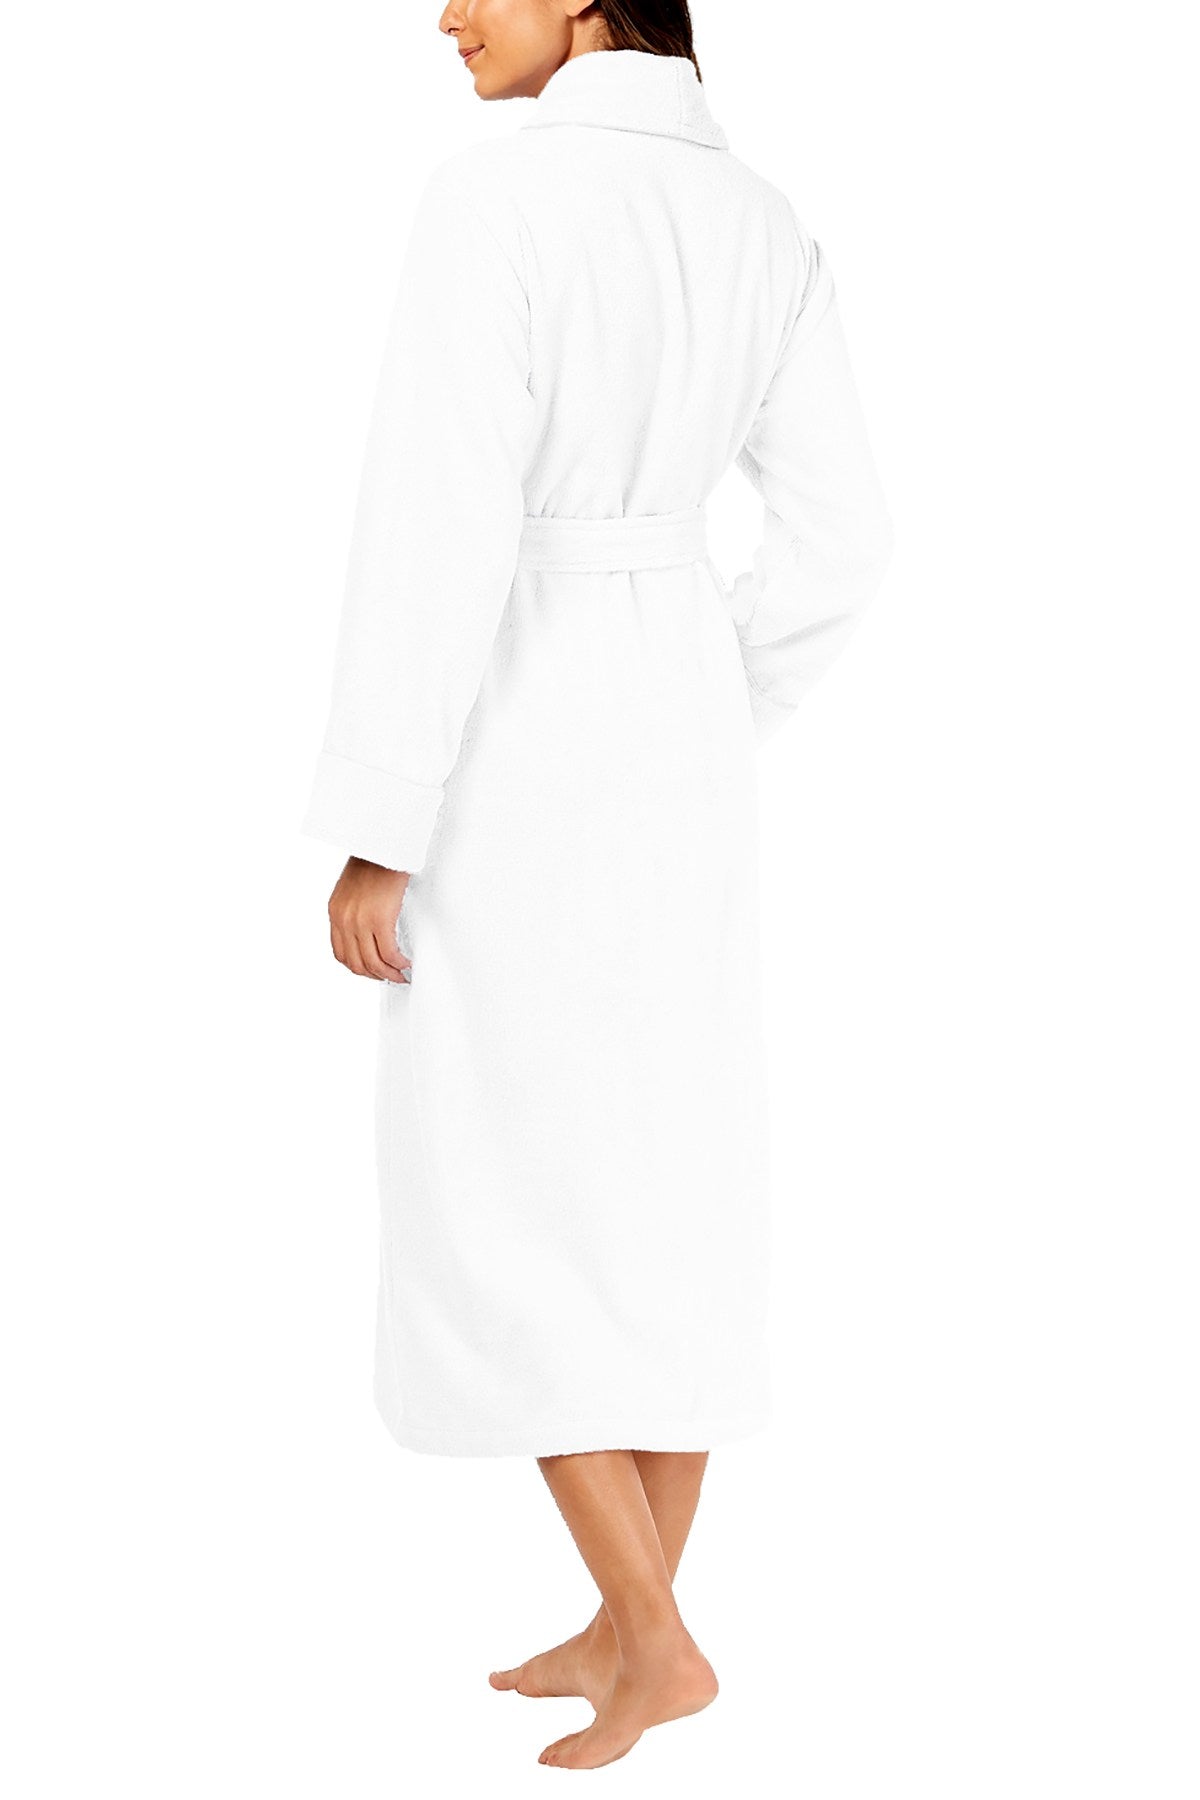 Charter Club Intimates Bright-White Luxe Terry Piped Wrap Robe